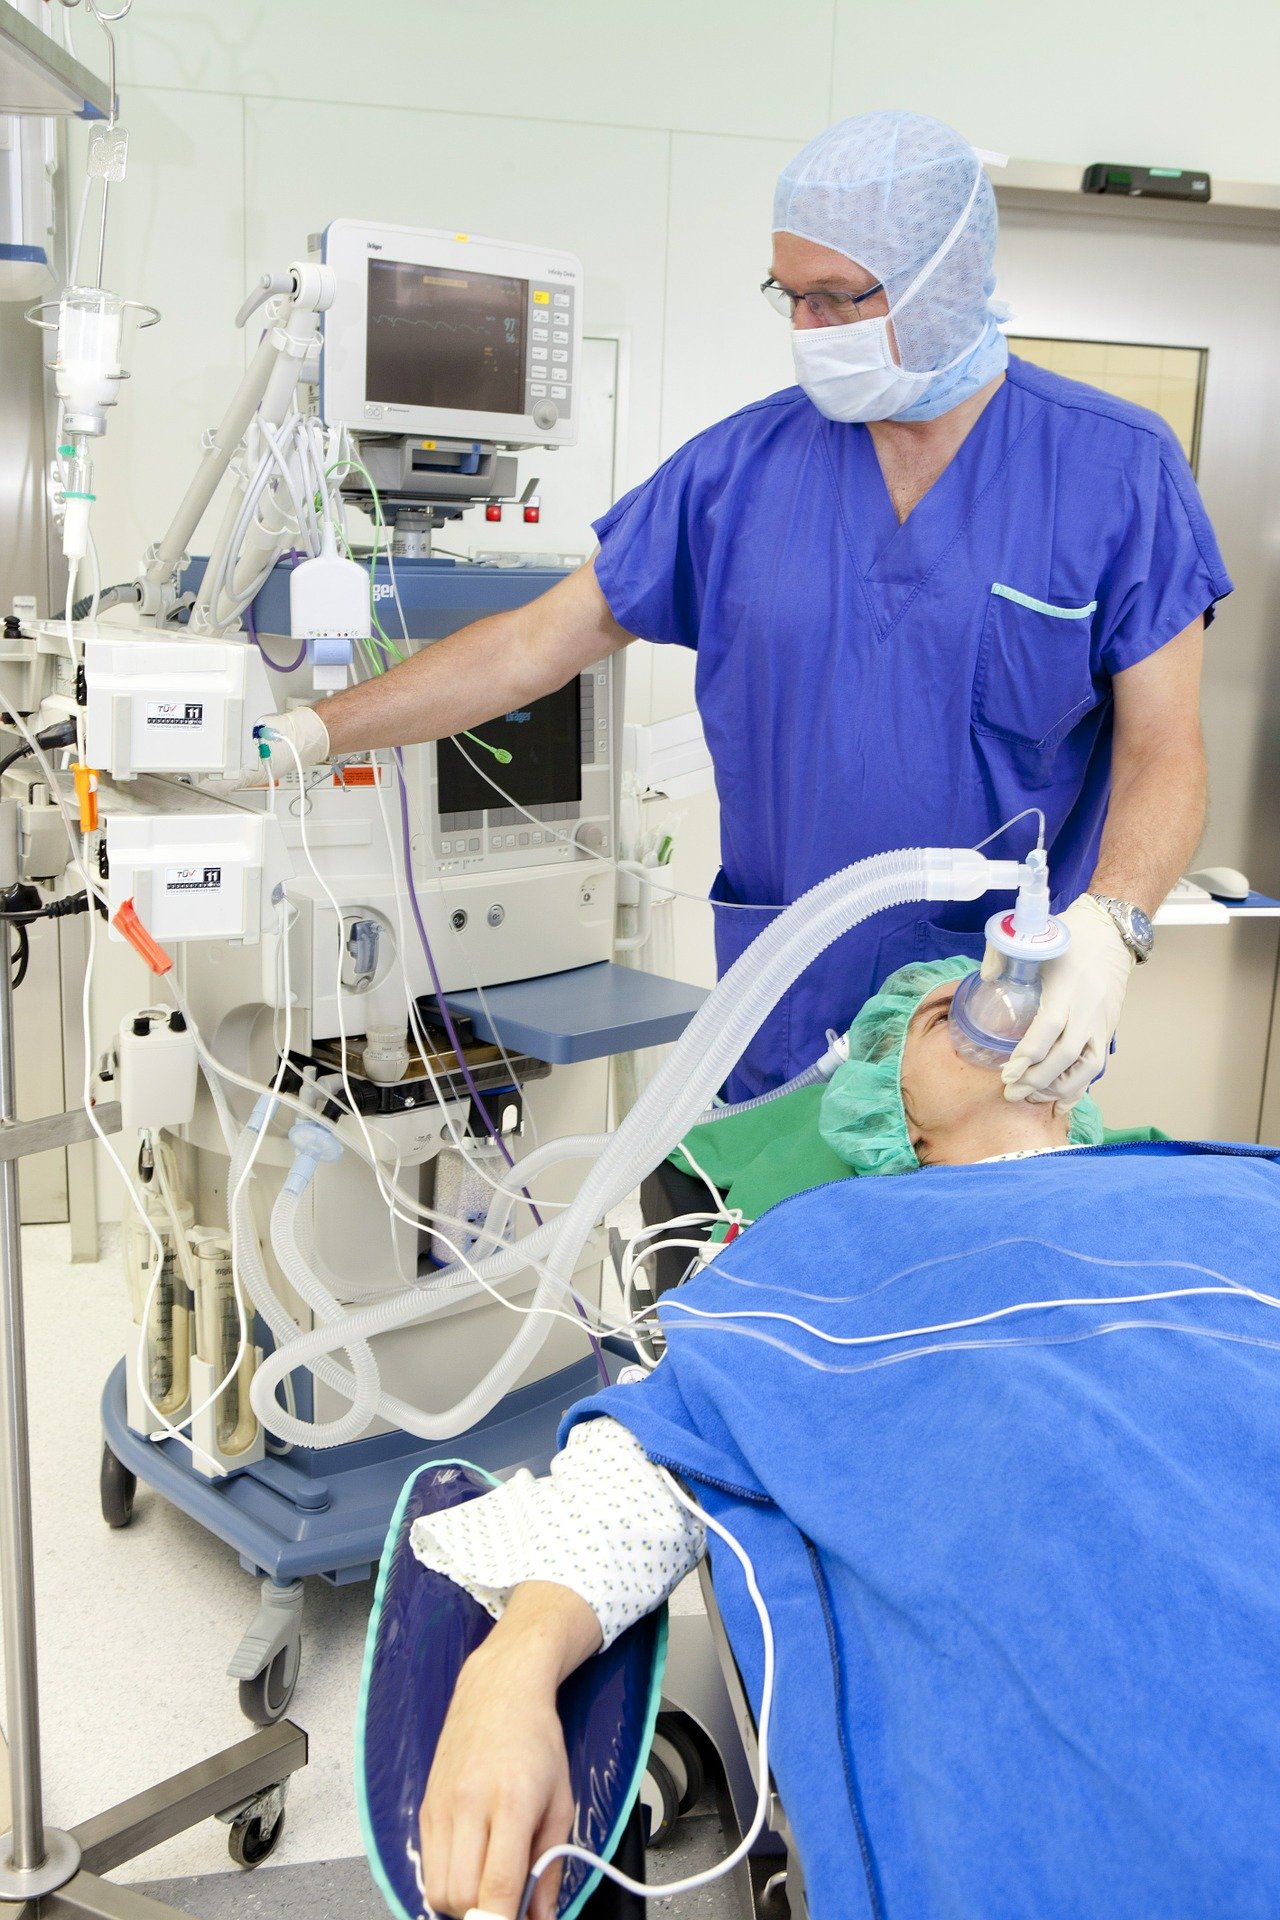 patient on a ventilator in a hospital.